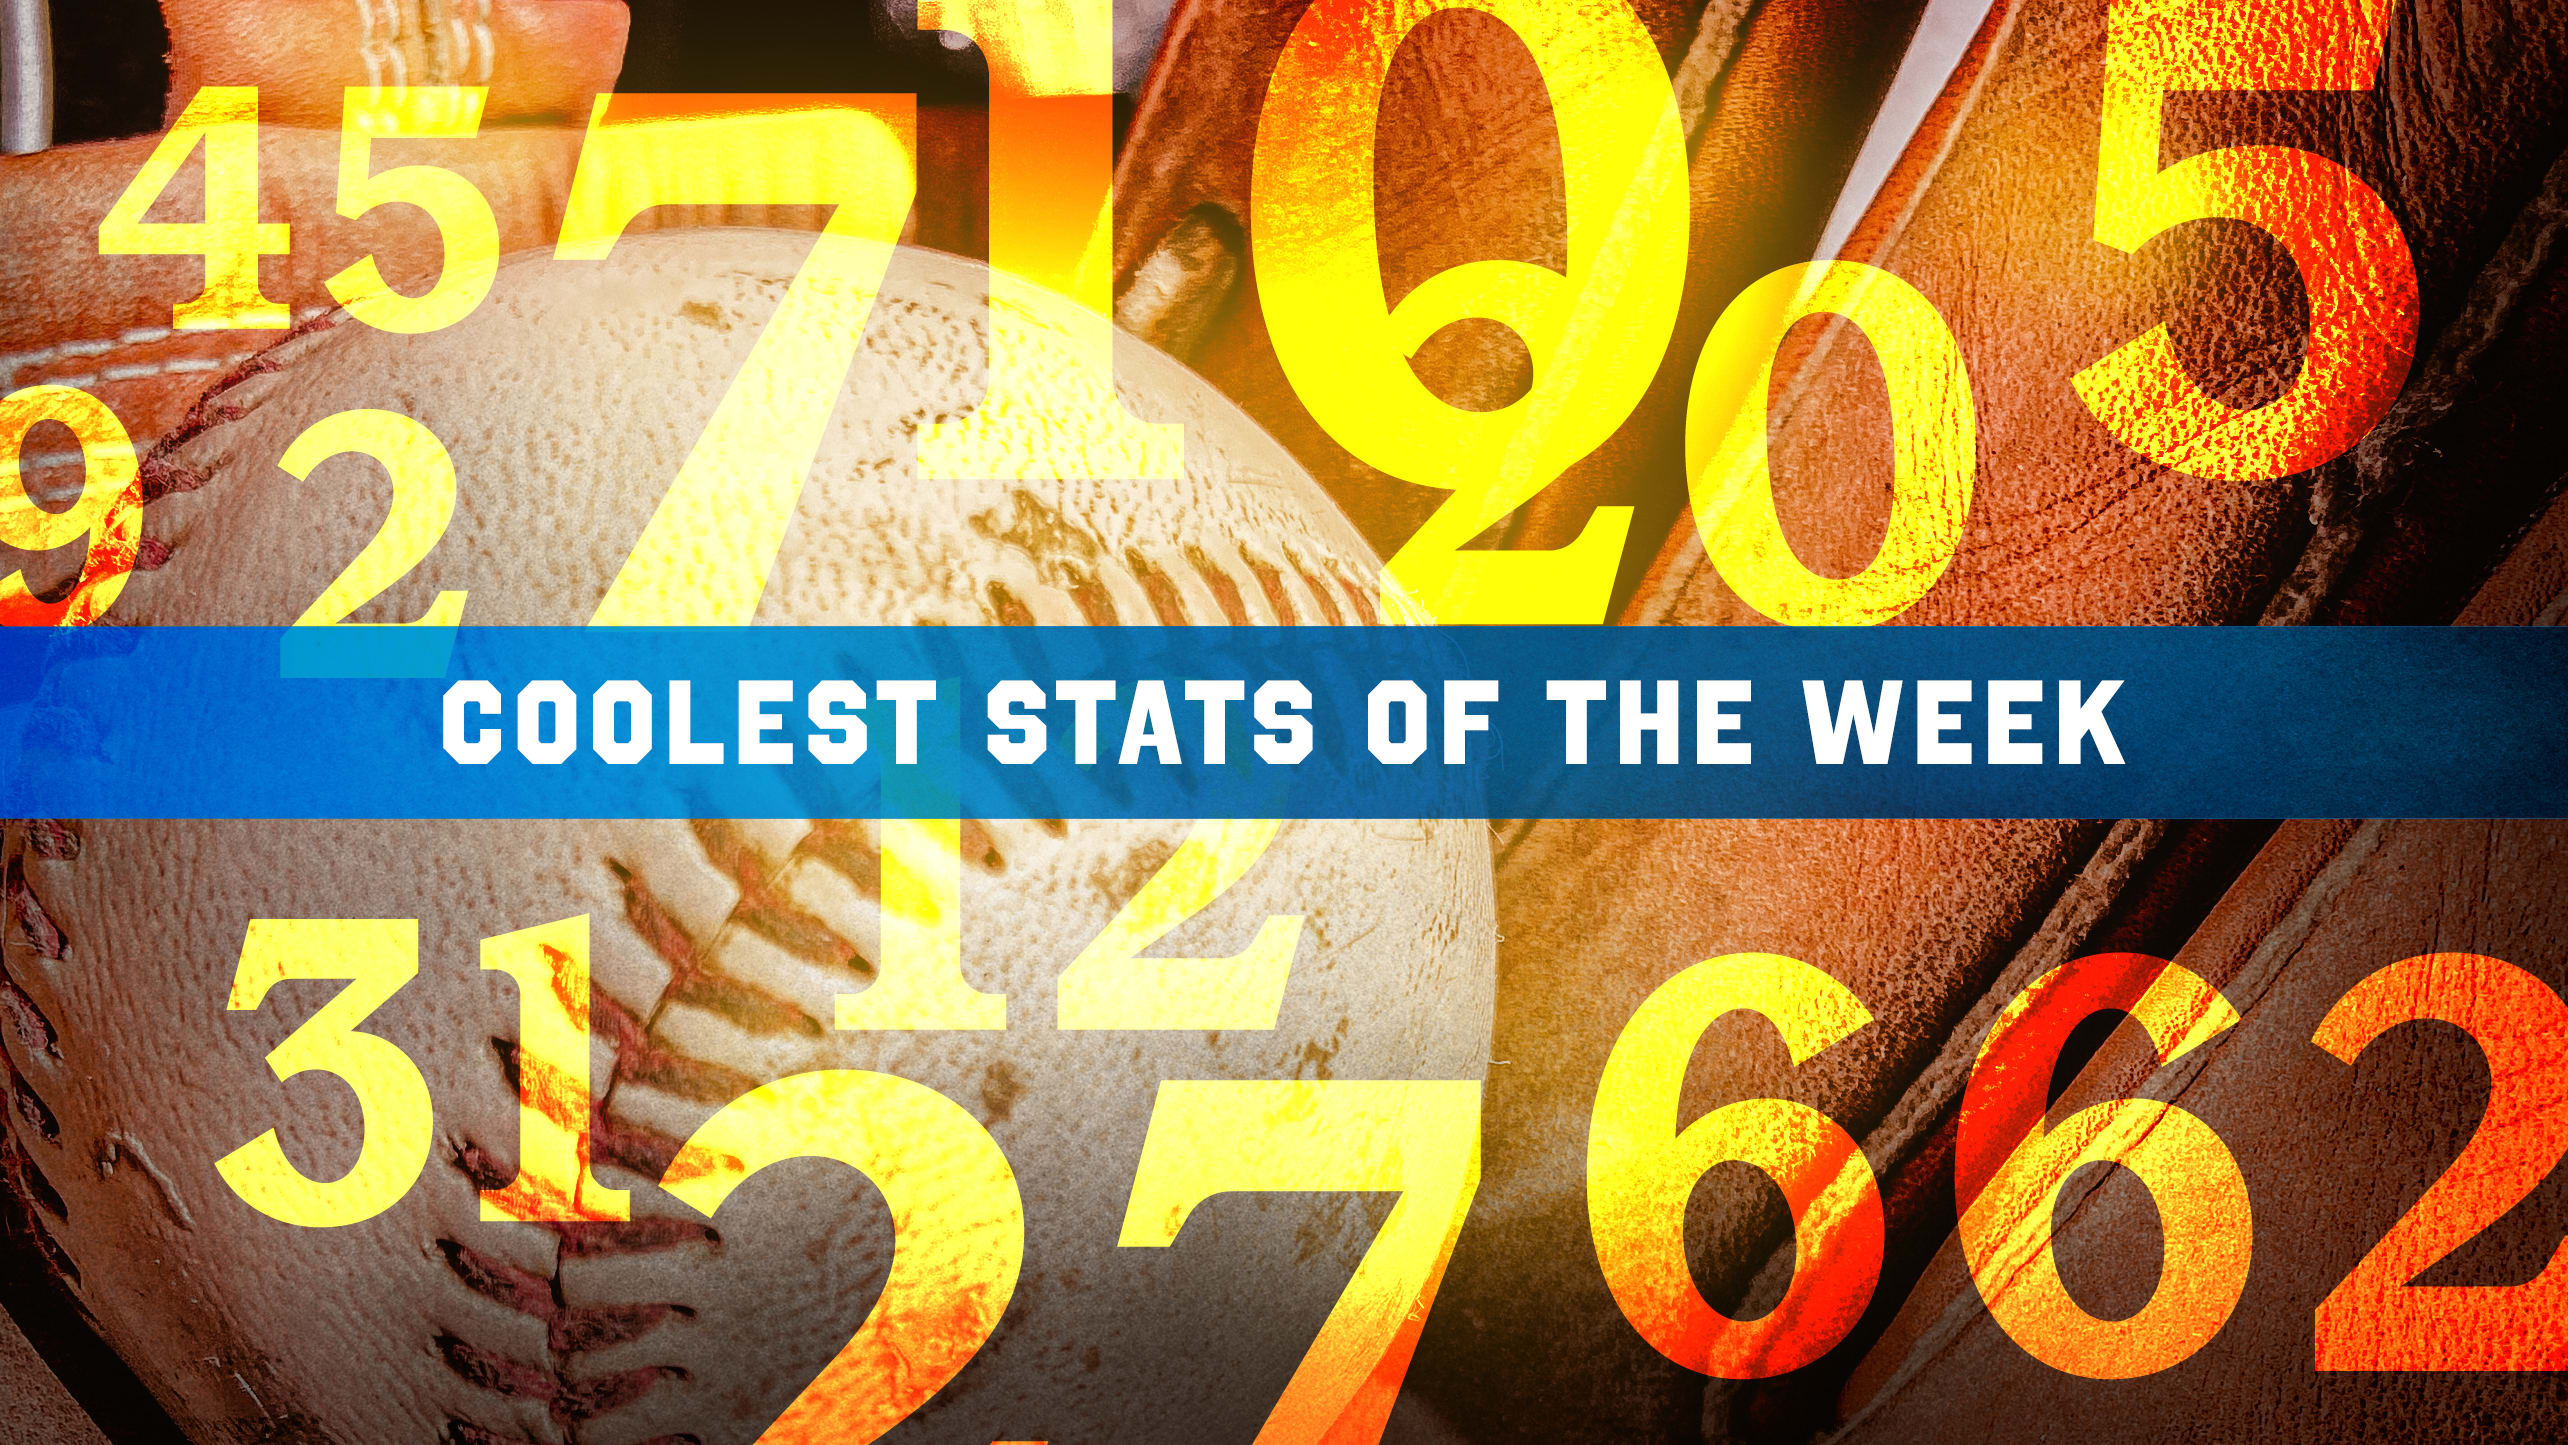 The coolest stats of the week